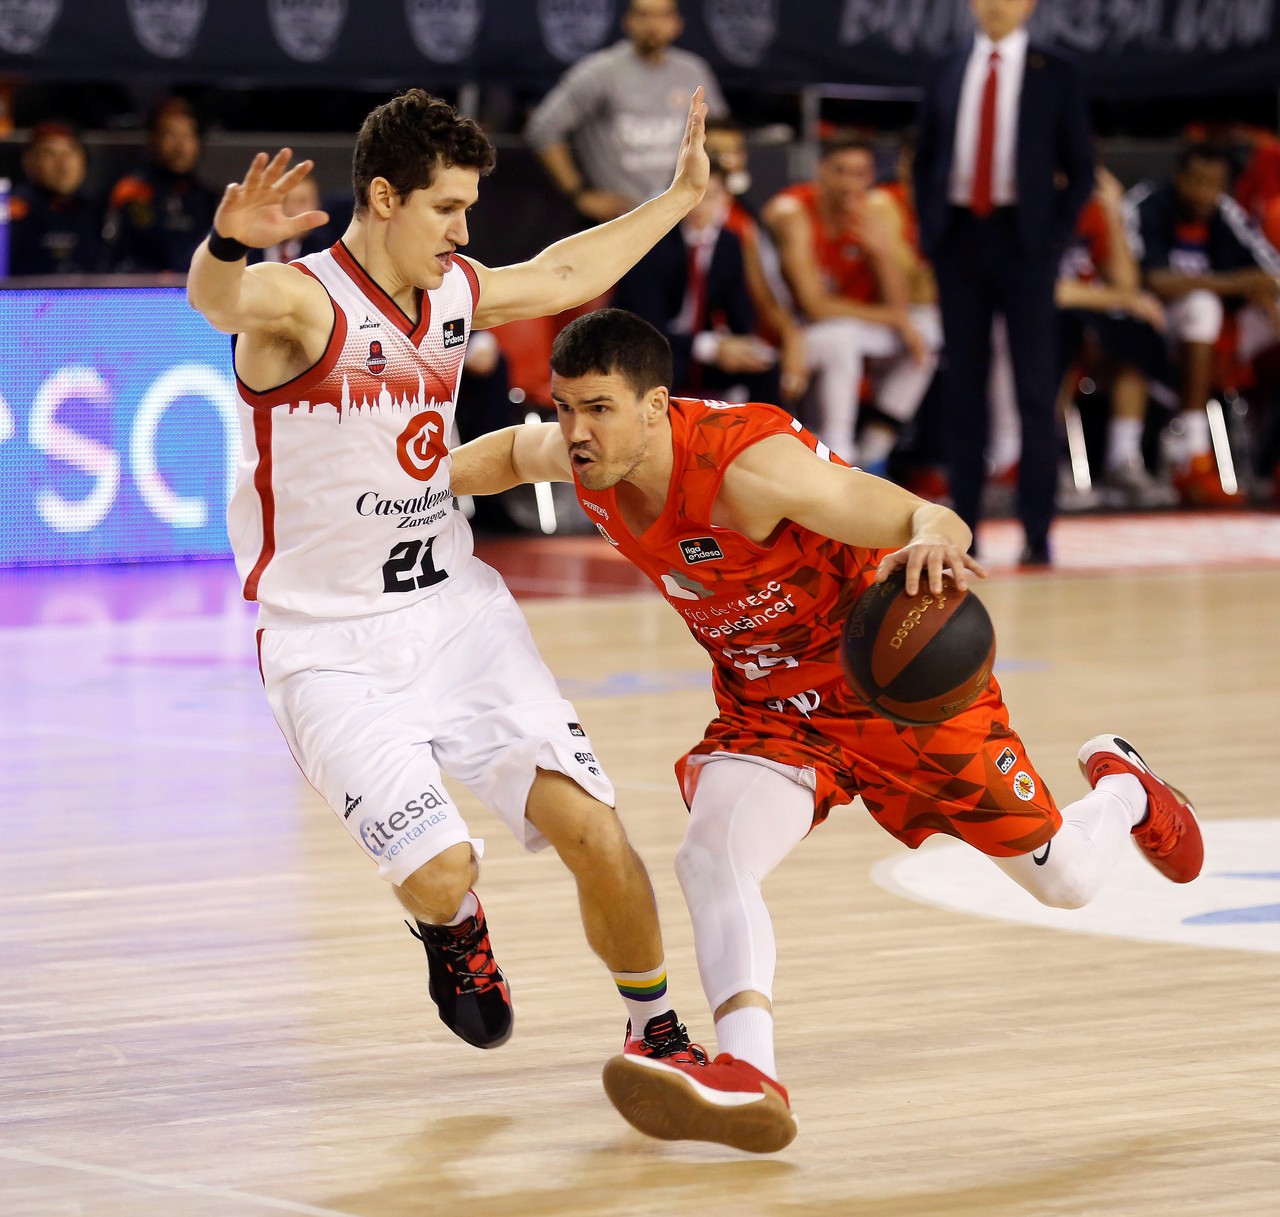 Zaragoza: a historic debut, a record of three-pointers and a couple of ex